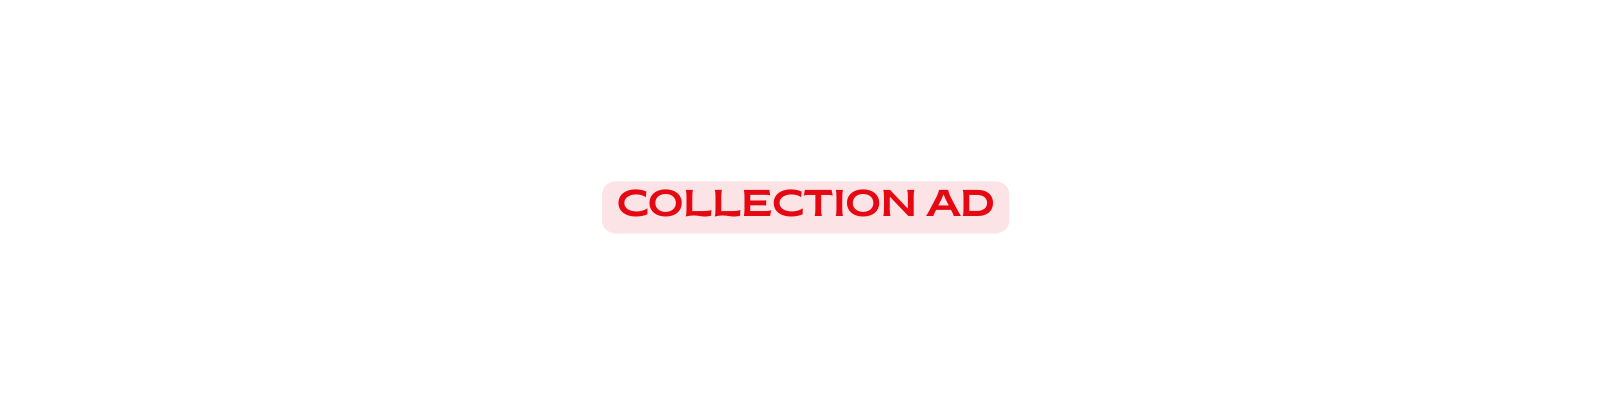 collection ad